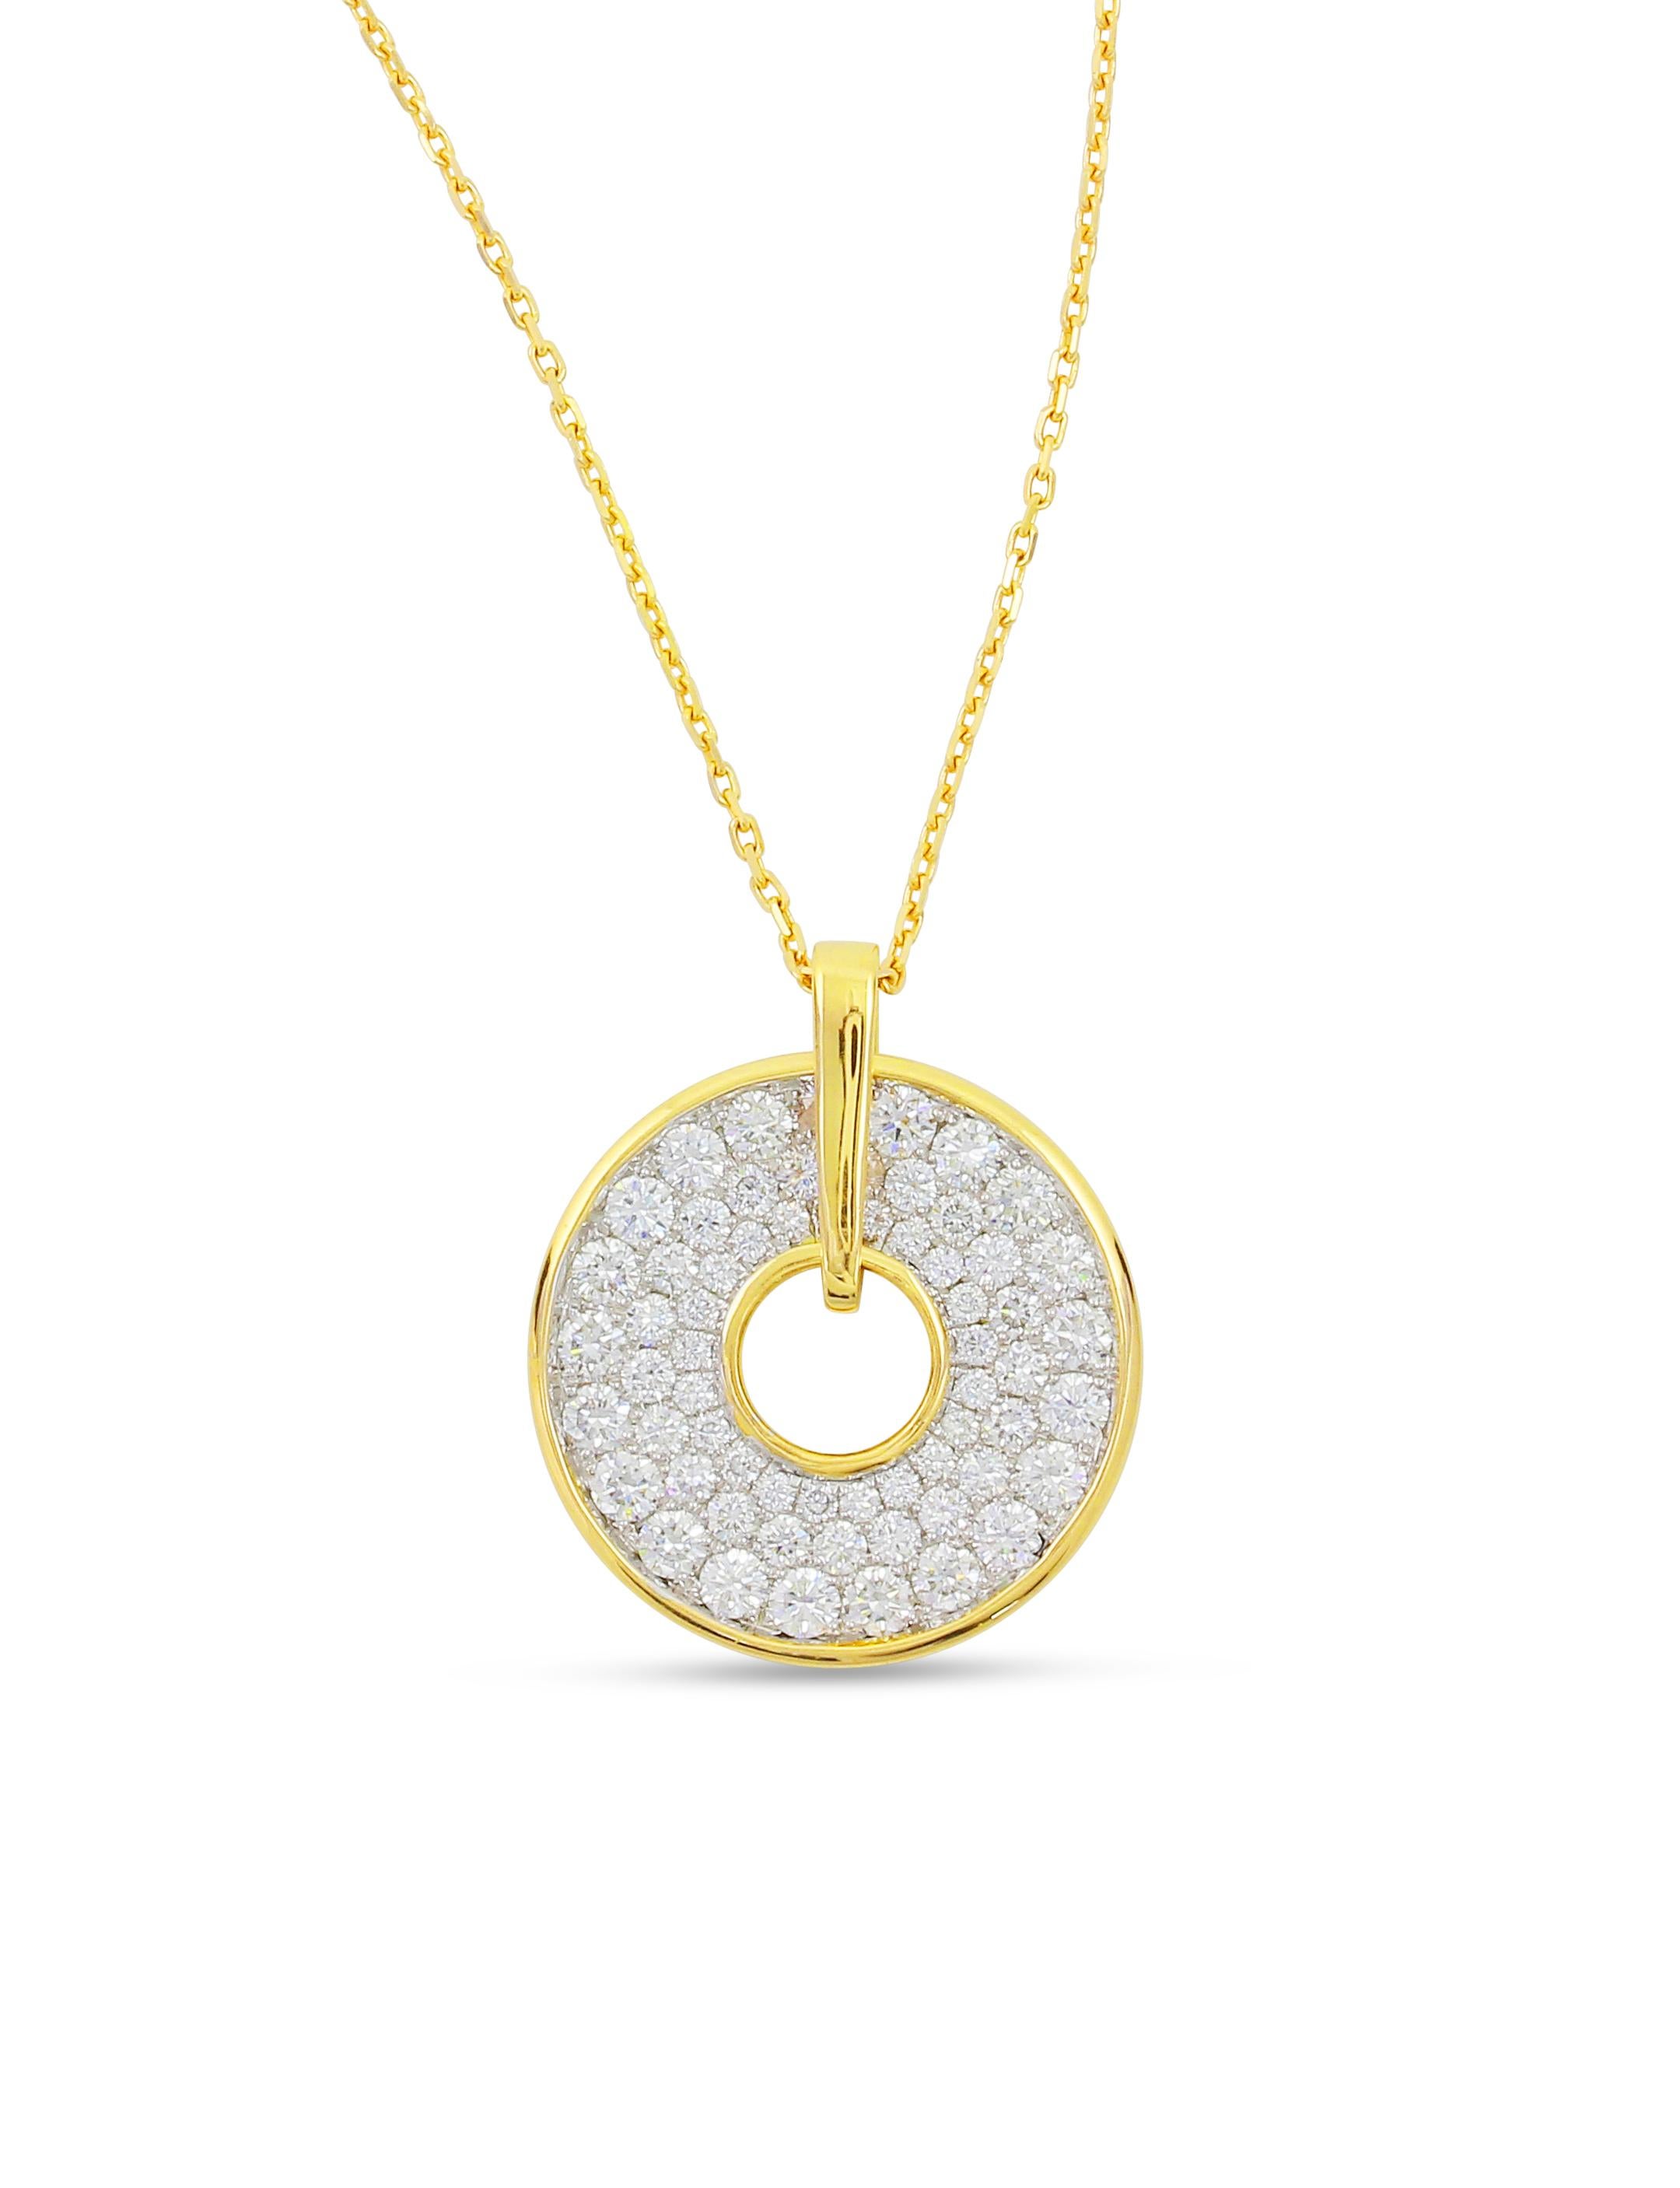 18K YWG FIRENZE GRADUATING DIAMOND SPINNING DISC  PENDANT AND SAGE 70 CHAIN
63 DIA 1.35 Carats
